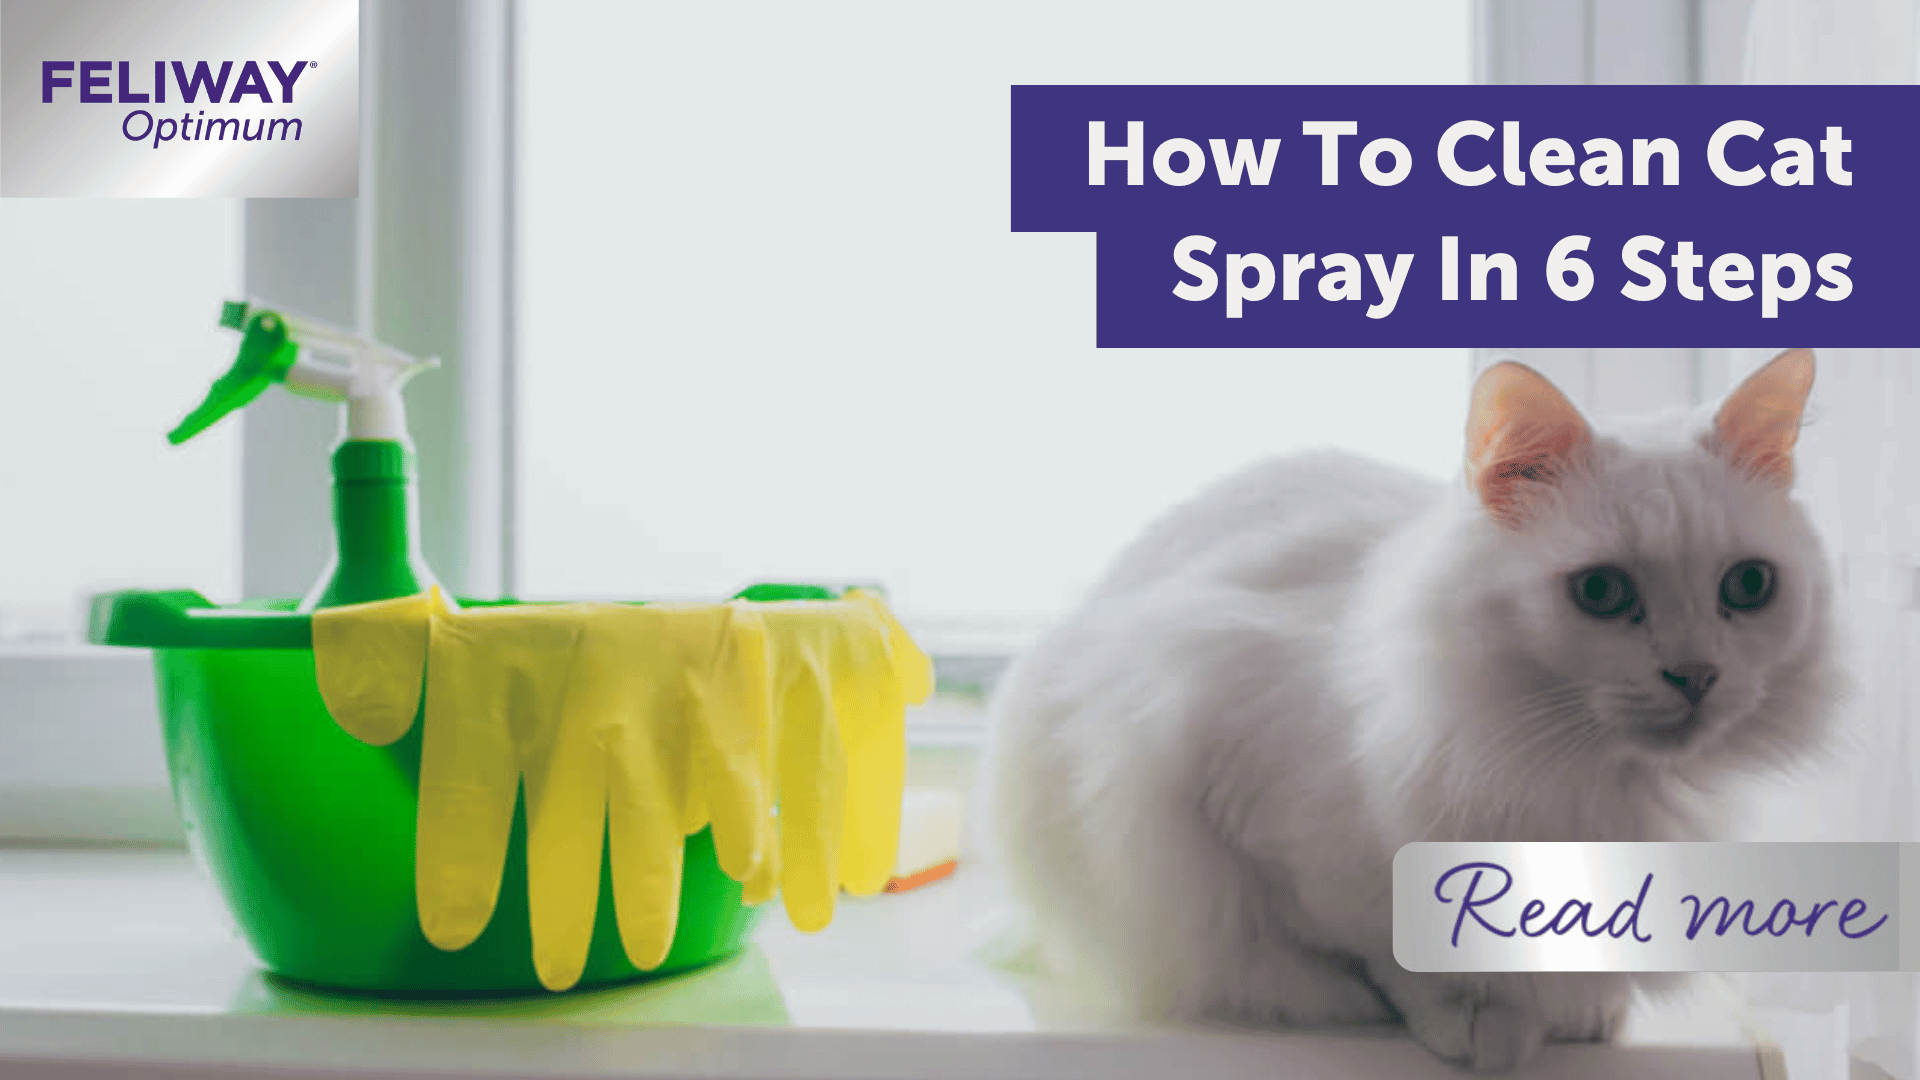 How To Clean Cat Spray In 6 Steps